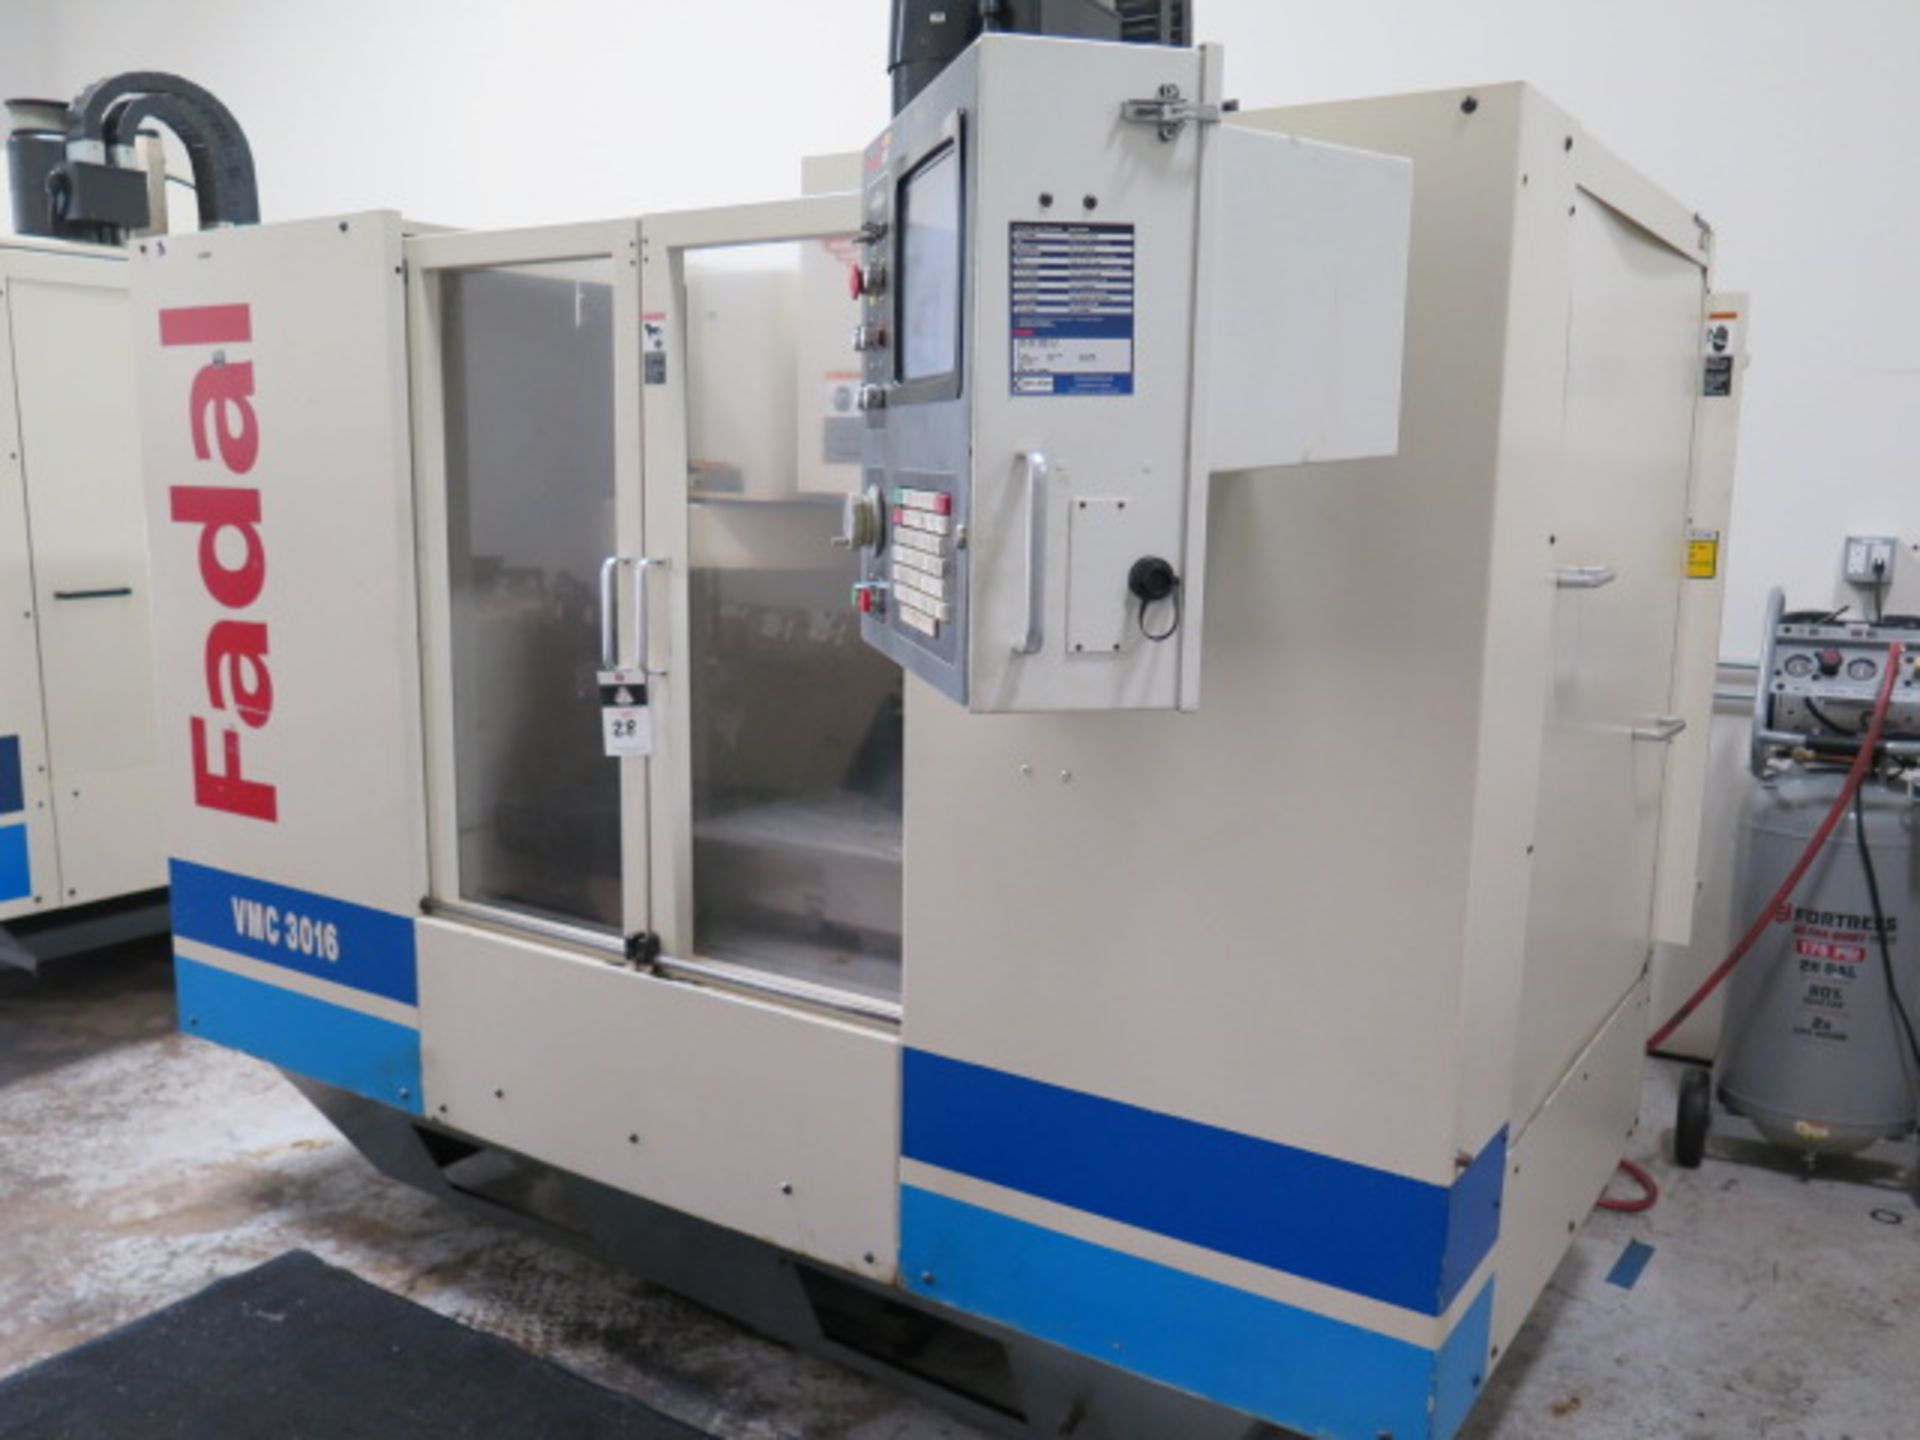 2003 Fadal VMC3016HT 4-Axis CNC VMC s/n 02124873 w/ Fadal Multi Processor control, SOLD AS IS - Image 2 of 12